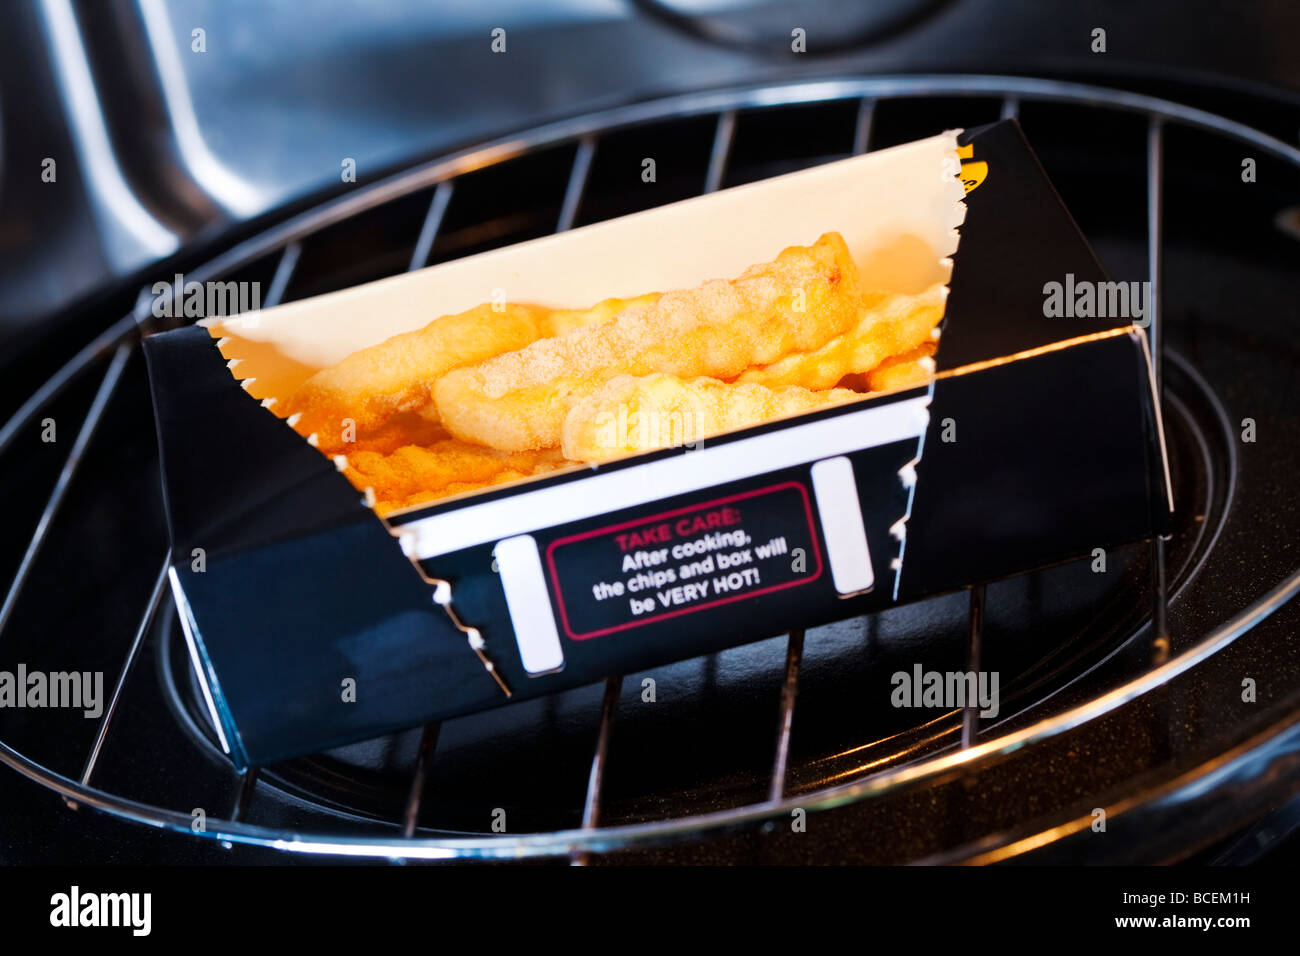 Box of McCain Micro Chips a microwaveable potato chip product inside a domestic microwave oven Stock Photo